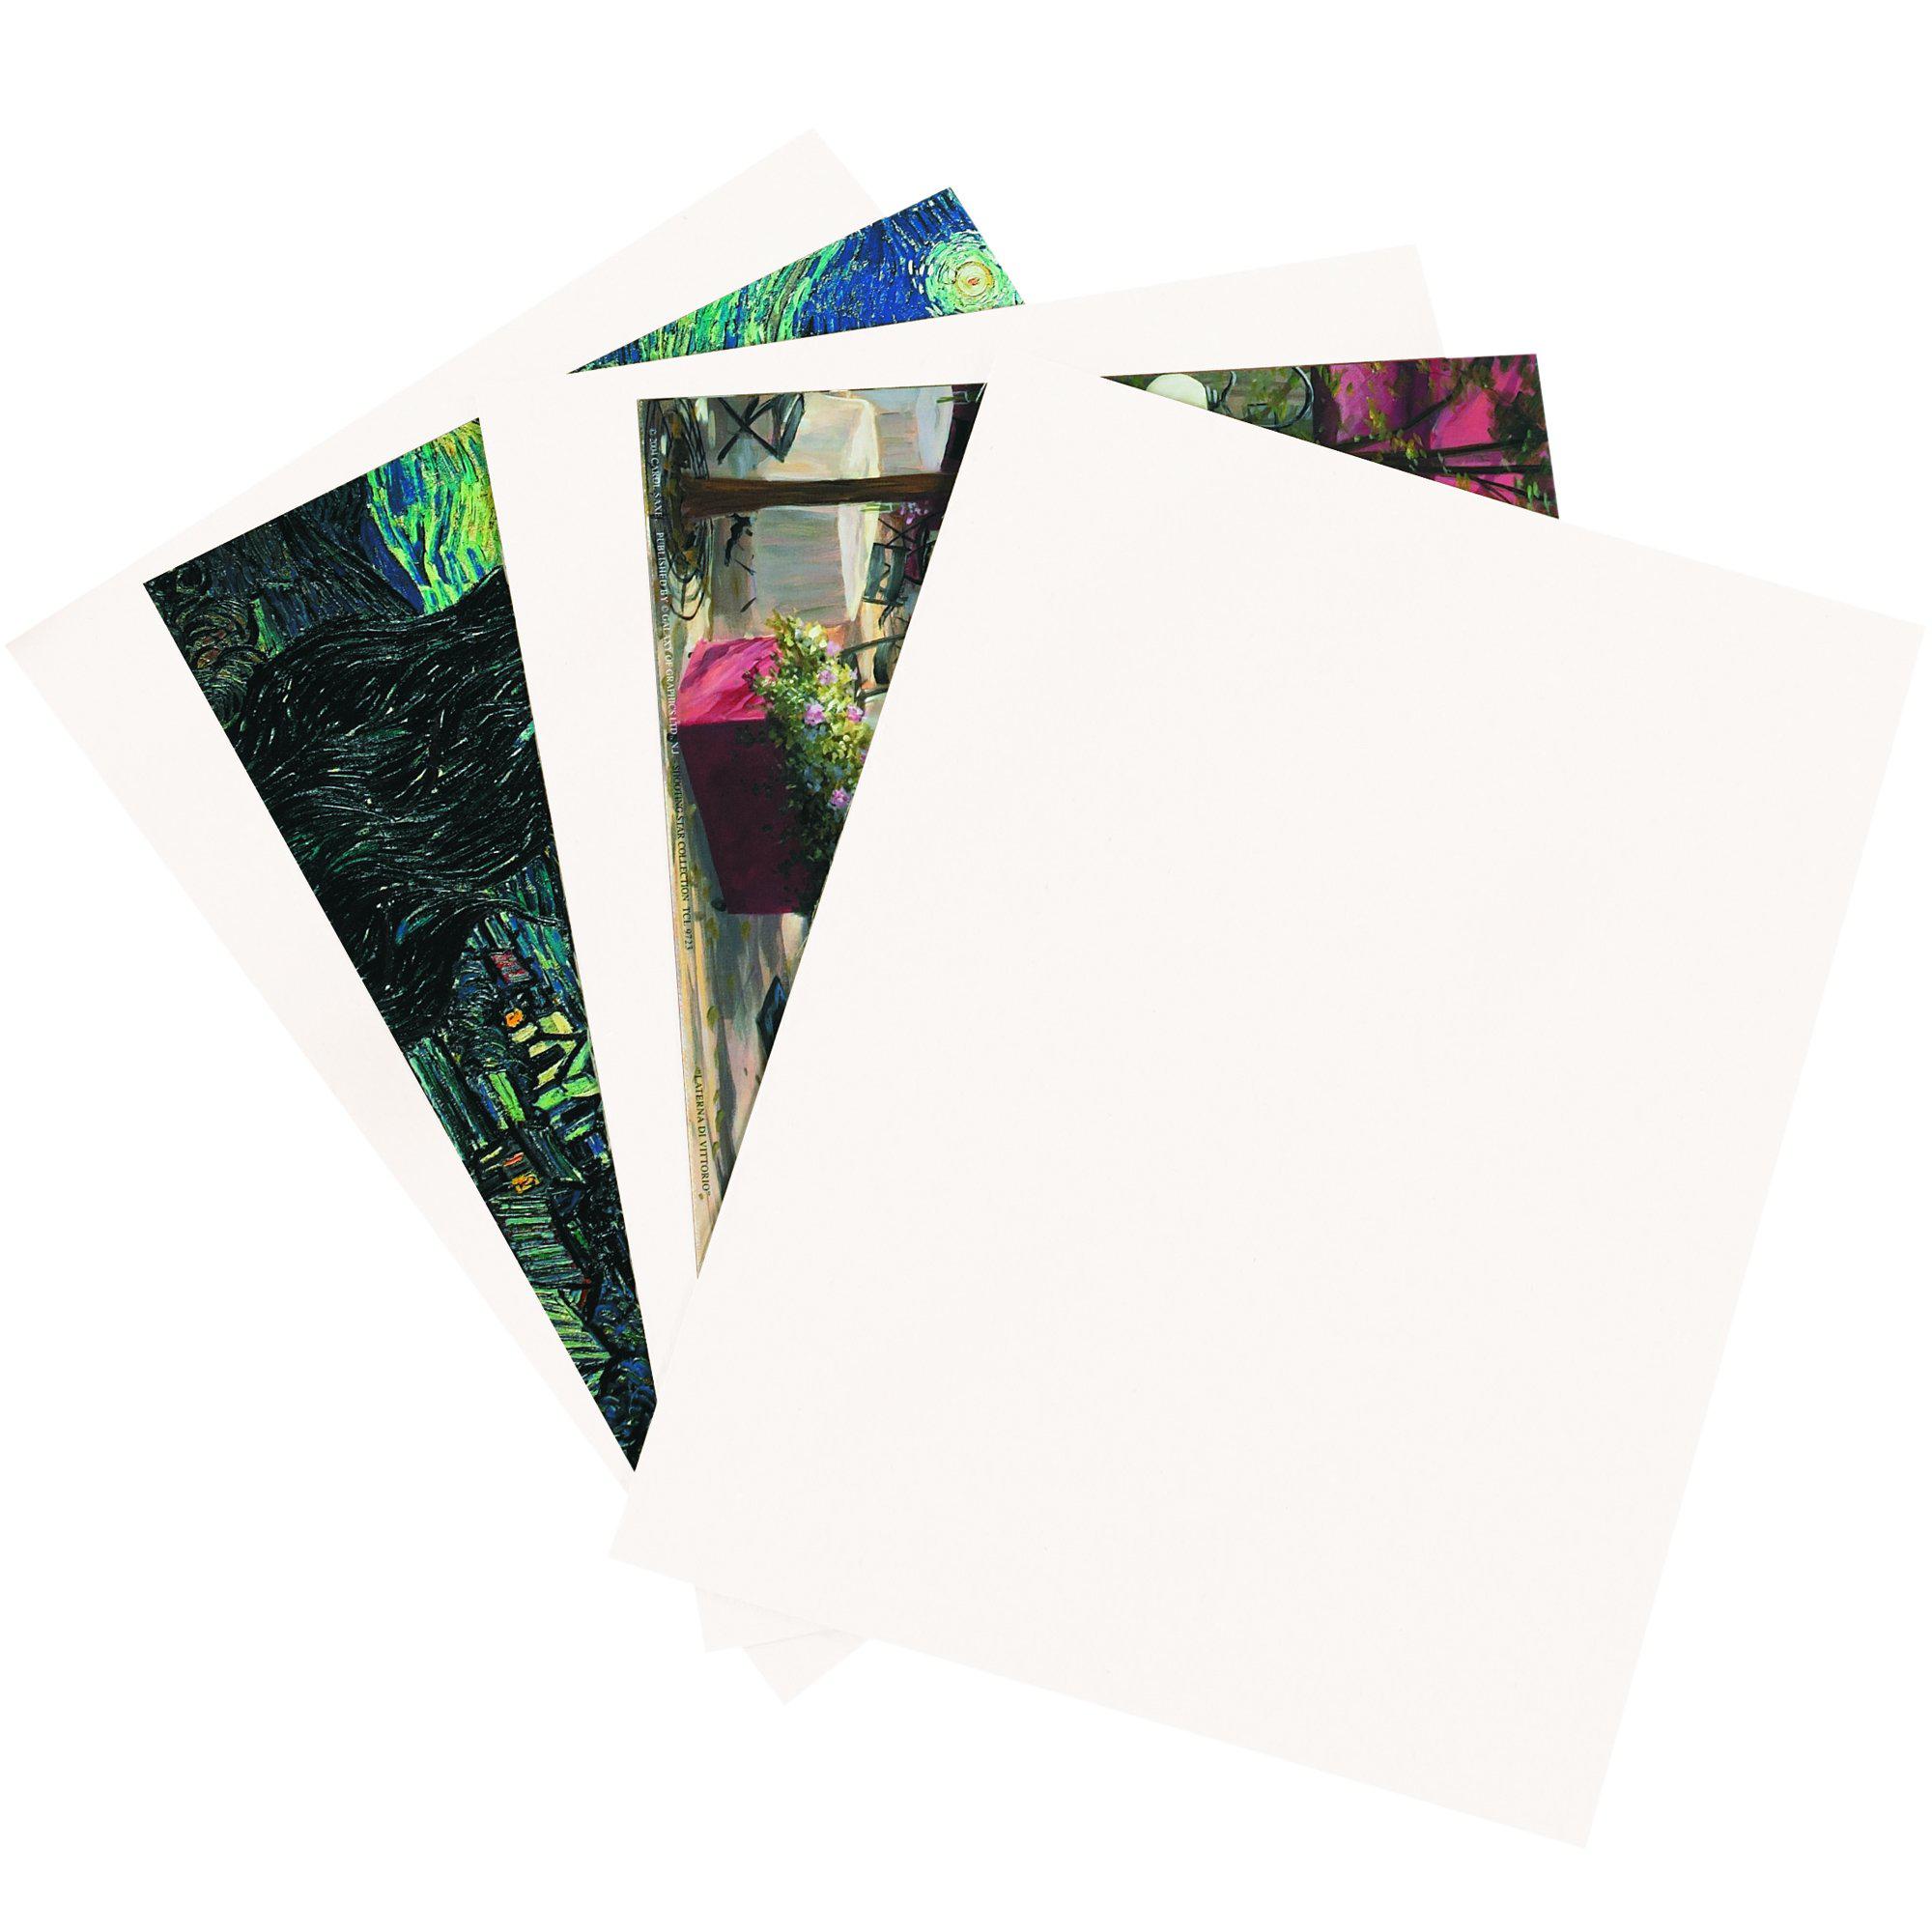 Box USA chipboard sheets, 8 1/2" x 11", white, 22 pt. medium duty, for package protection, scrapbooking and picture frame backing, 96